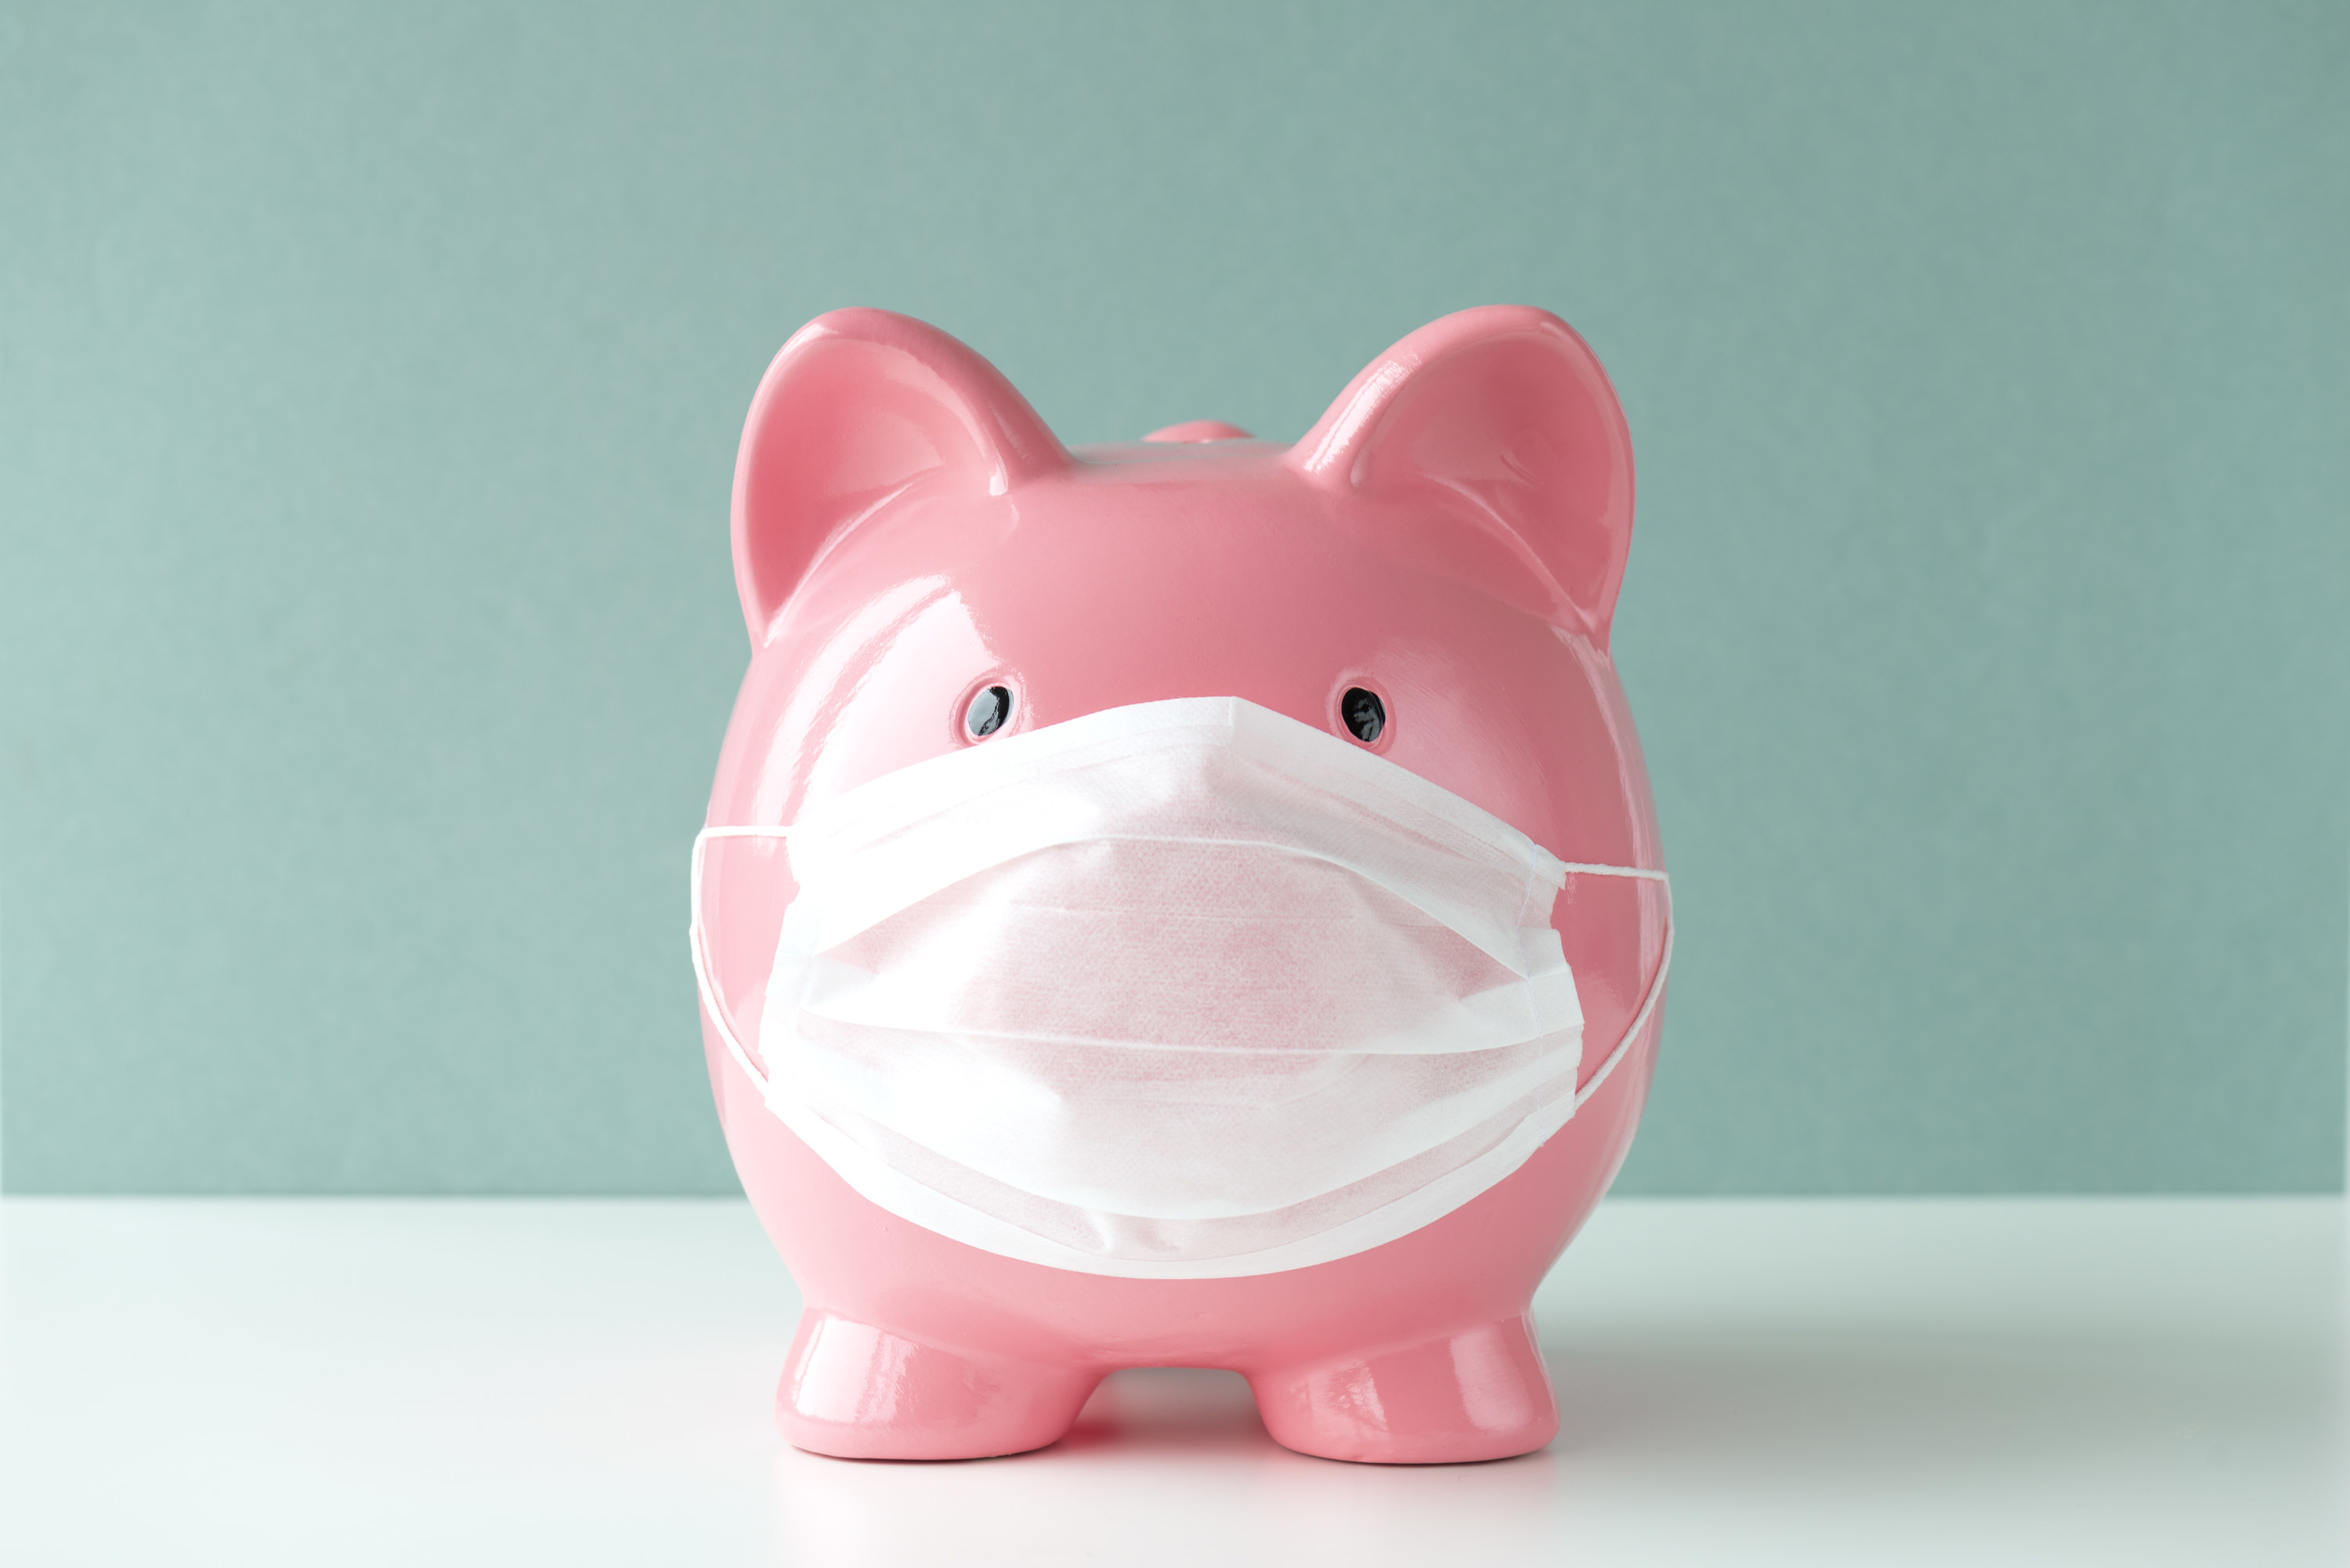 A piggy bank with a face mask on